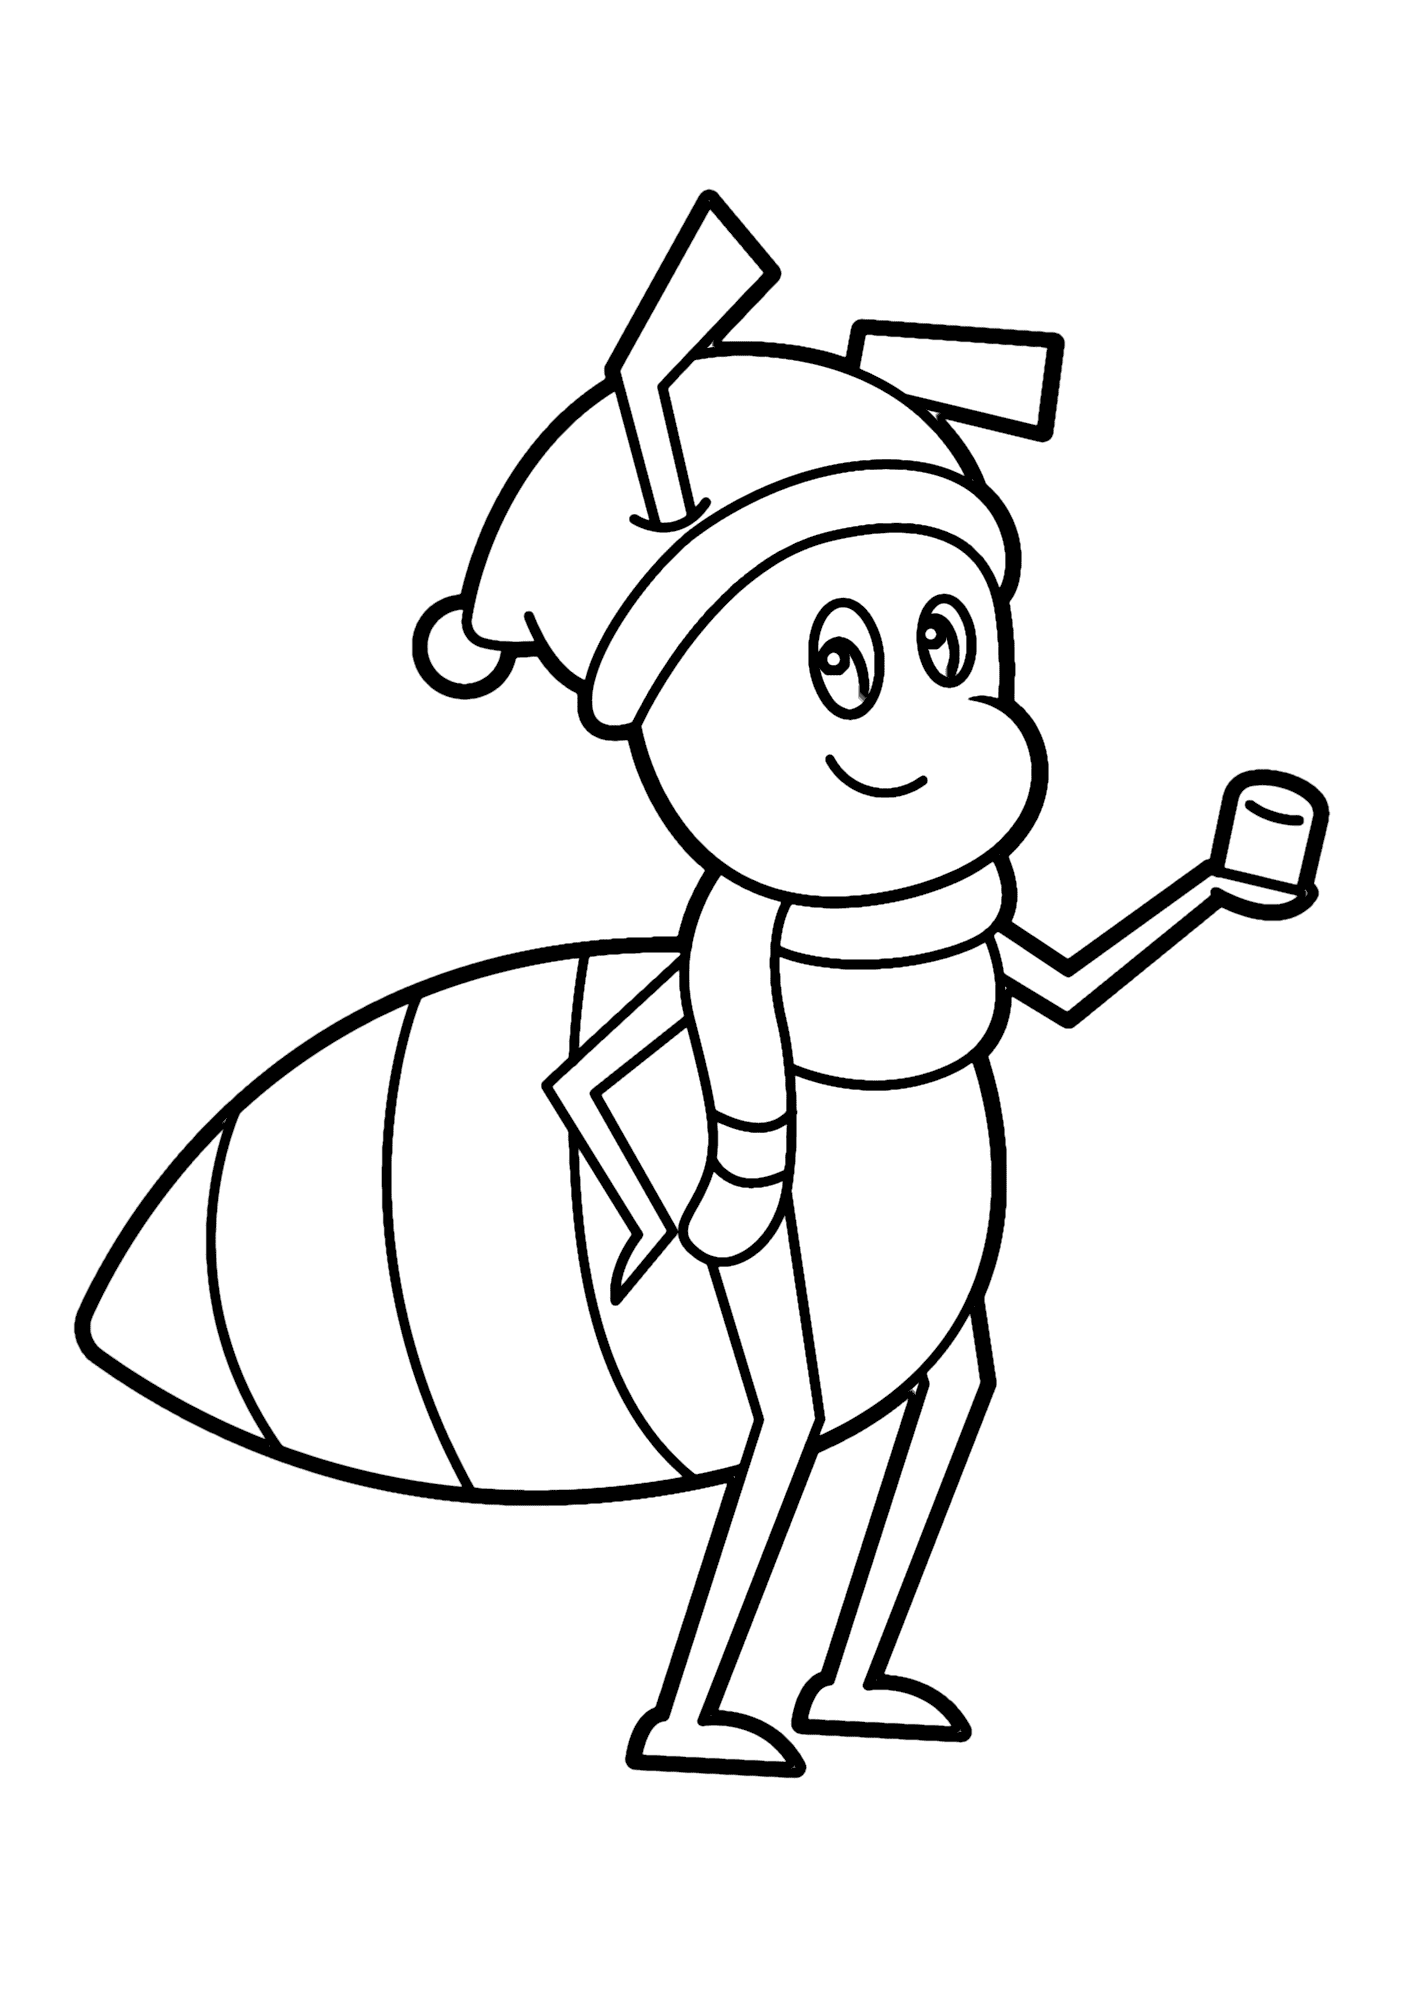 Red Ant Cartoon Coloring Page